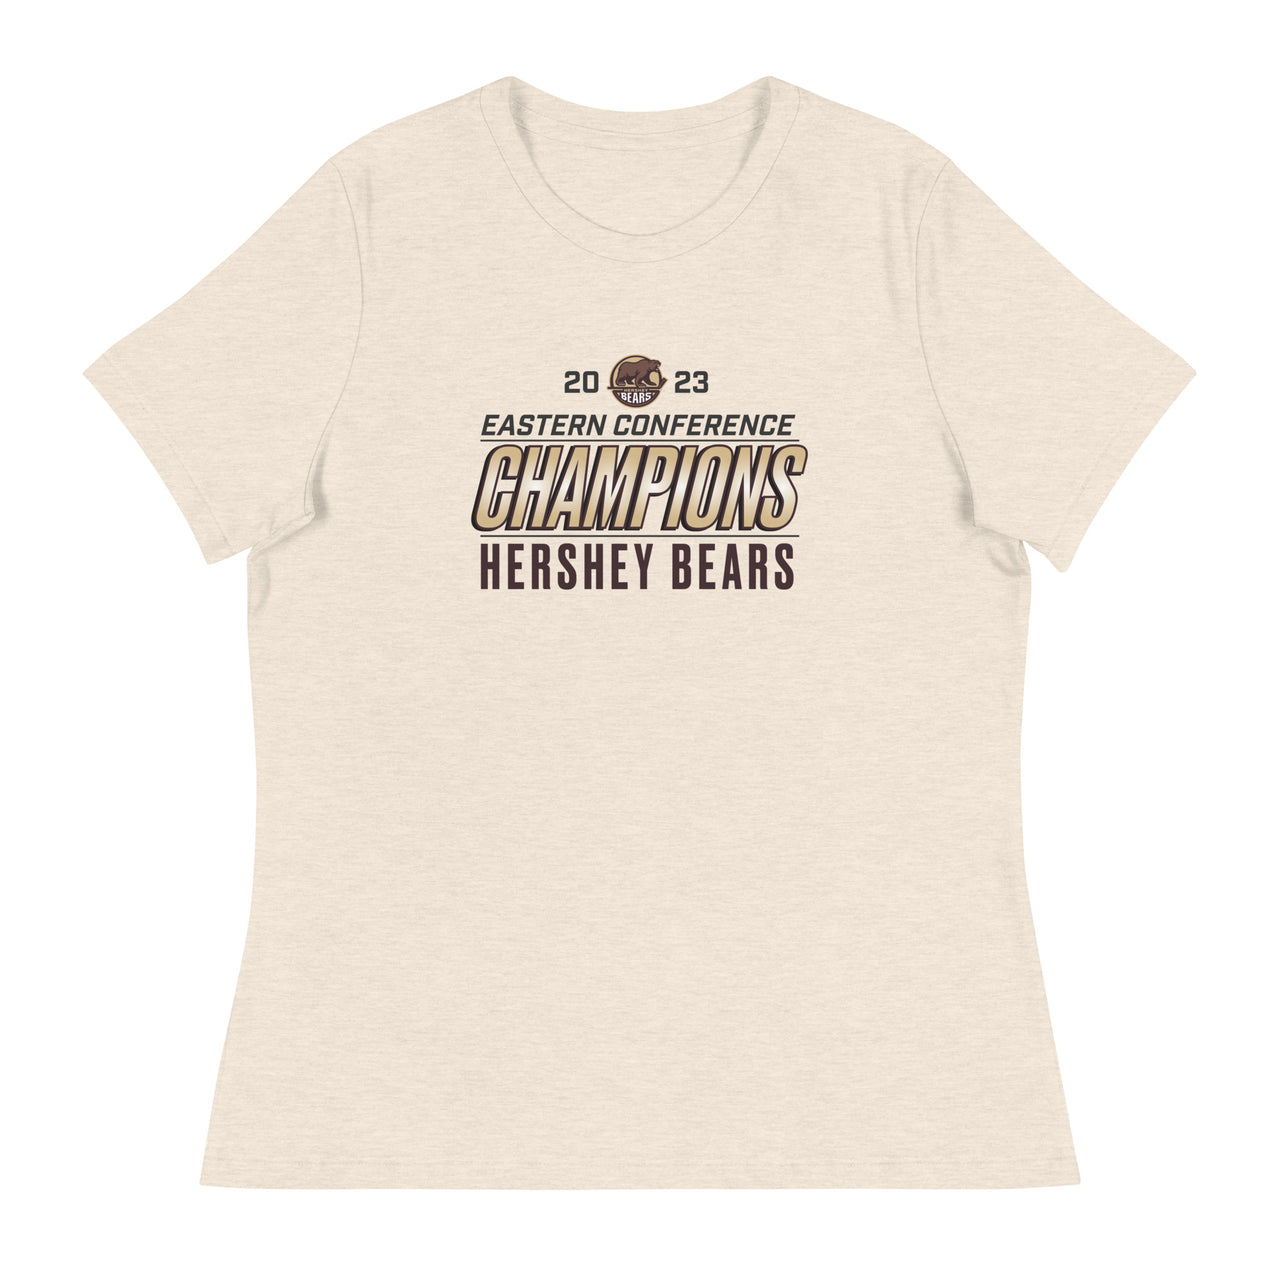 Hershey Bears 2023 Eastern Conference Champions Women's Relaxed T-Shirt